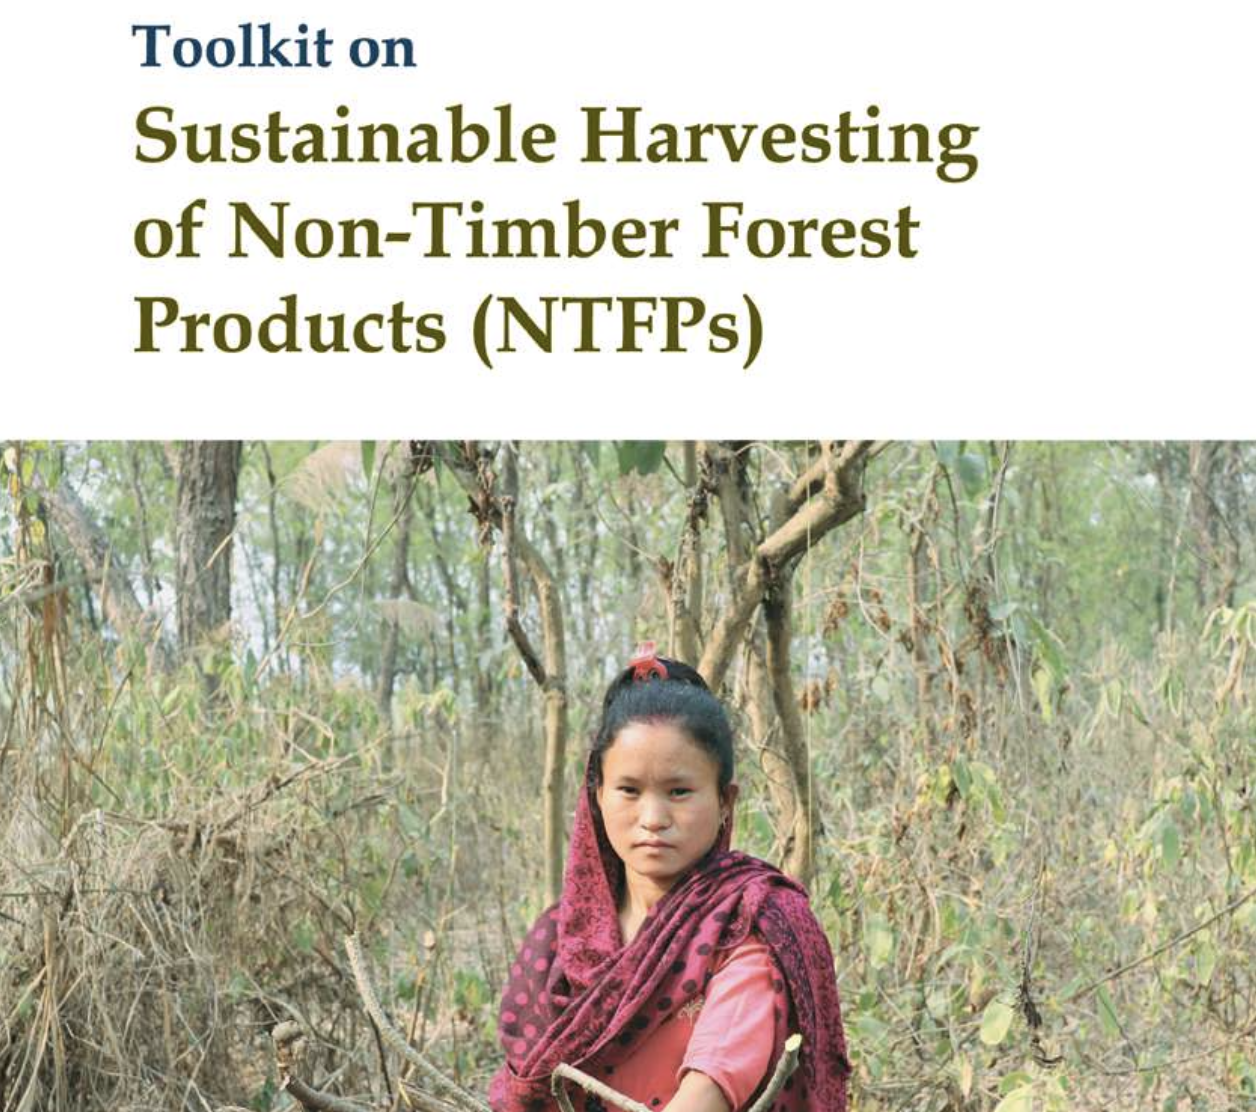 Toolkit on Sustainable Harvesting of Non-Timber Forest Products (English version)